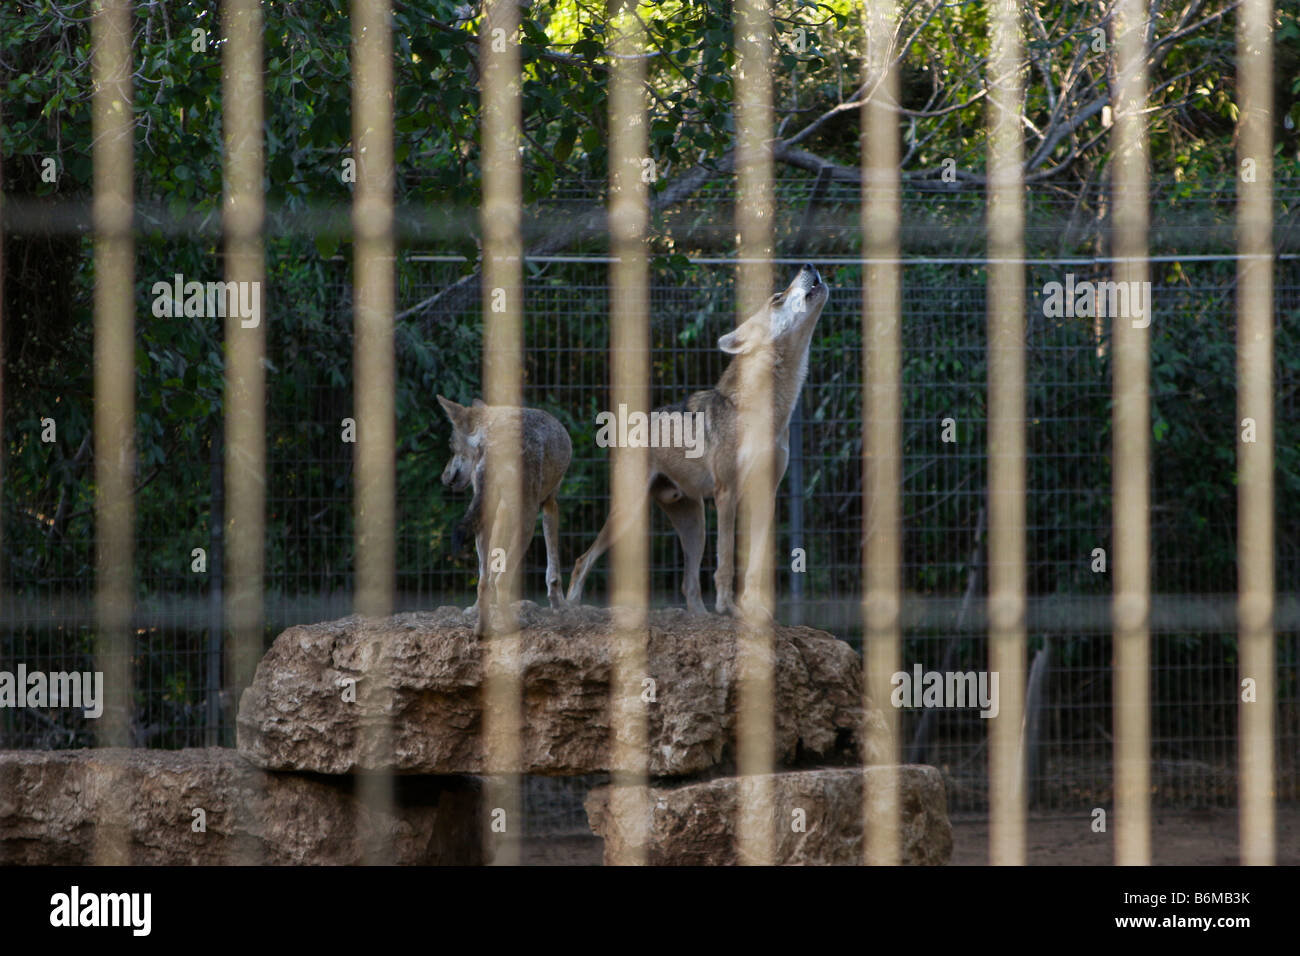 Two Arabian wolves Canis lupus arabs in a cage Stock Photo